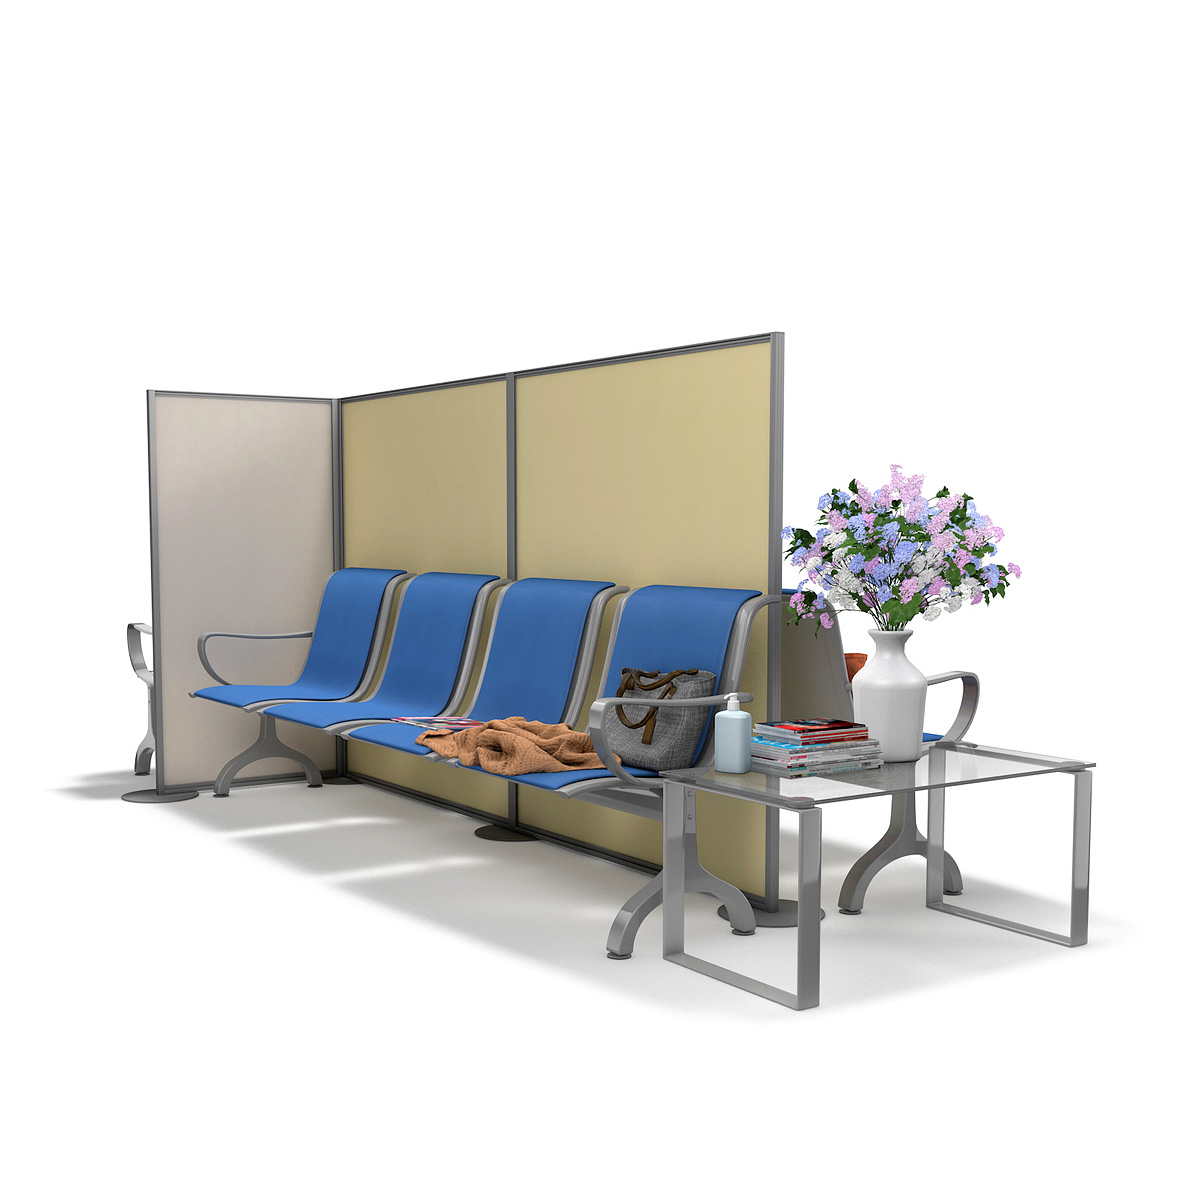 FRONTIER® Medical Screens Anti Microbial Freestanding Divider Screens 